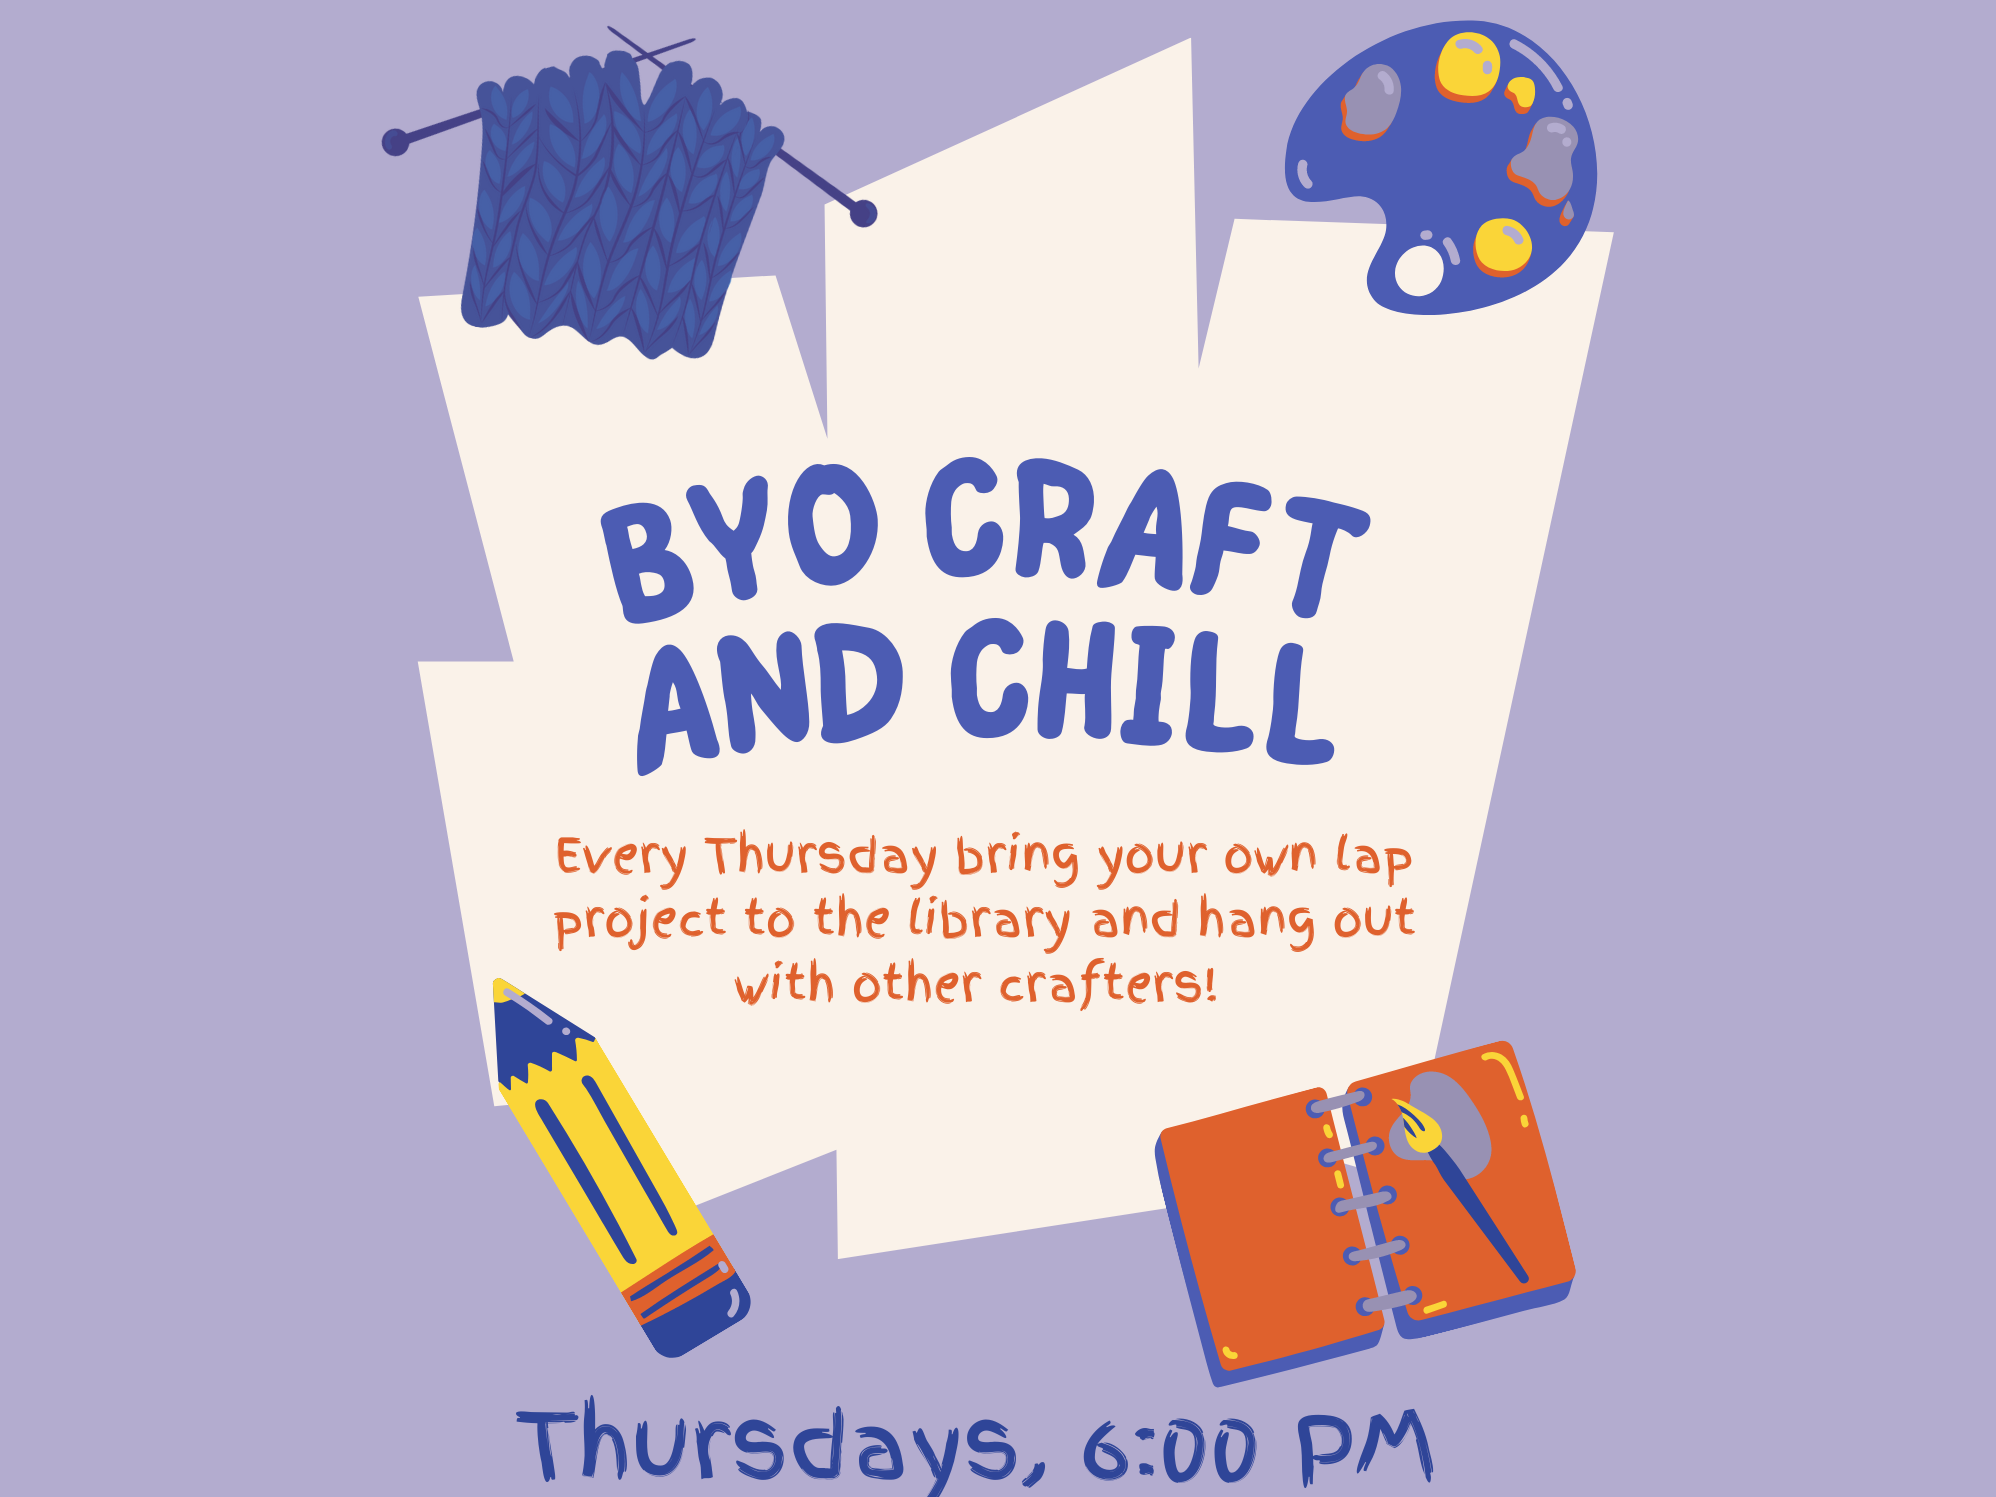 BYO craft and chill